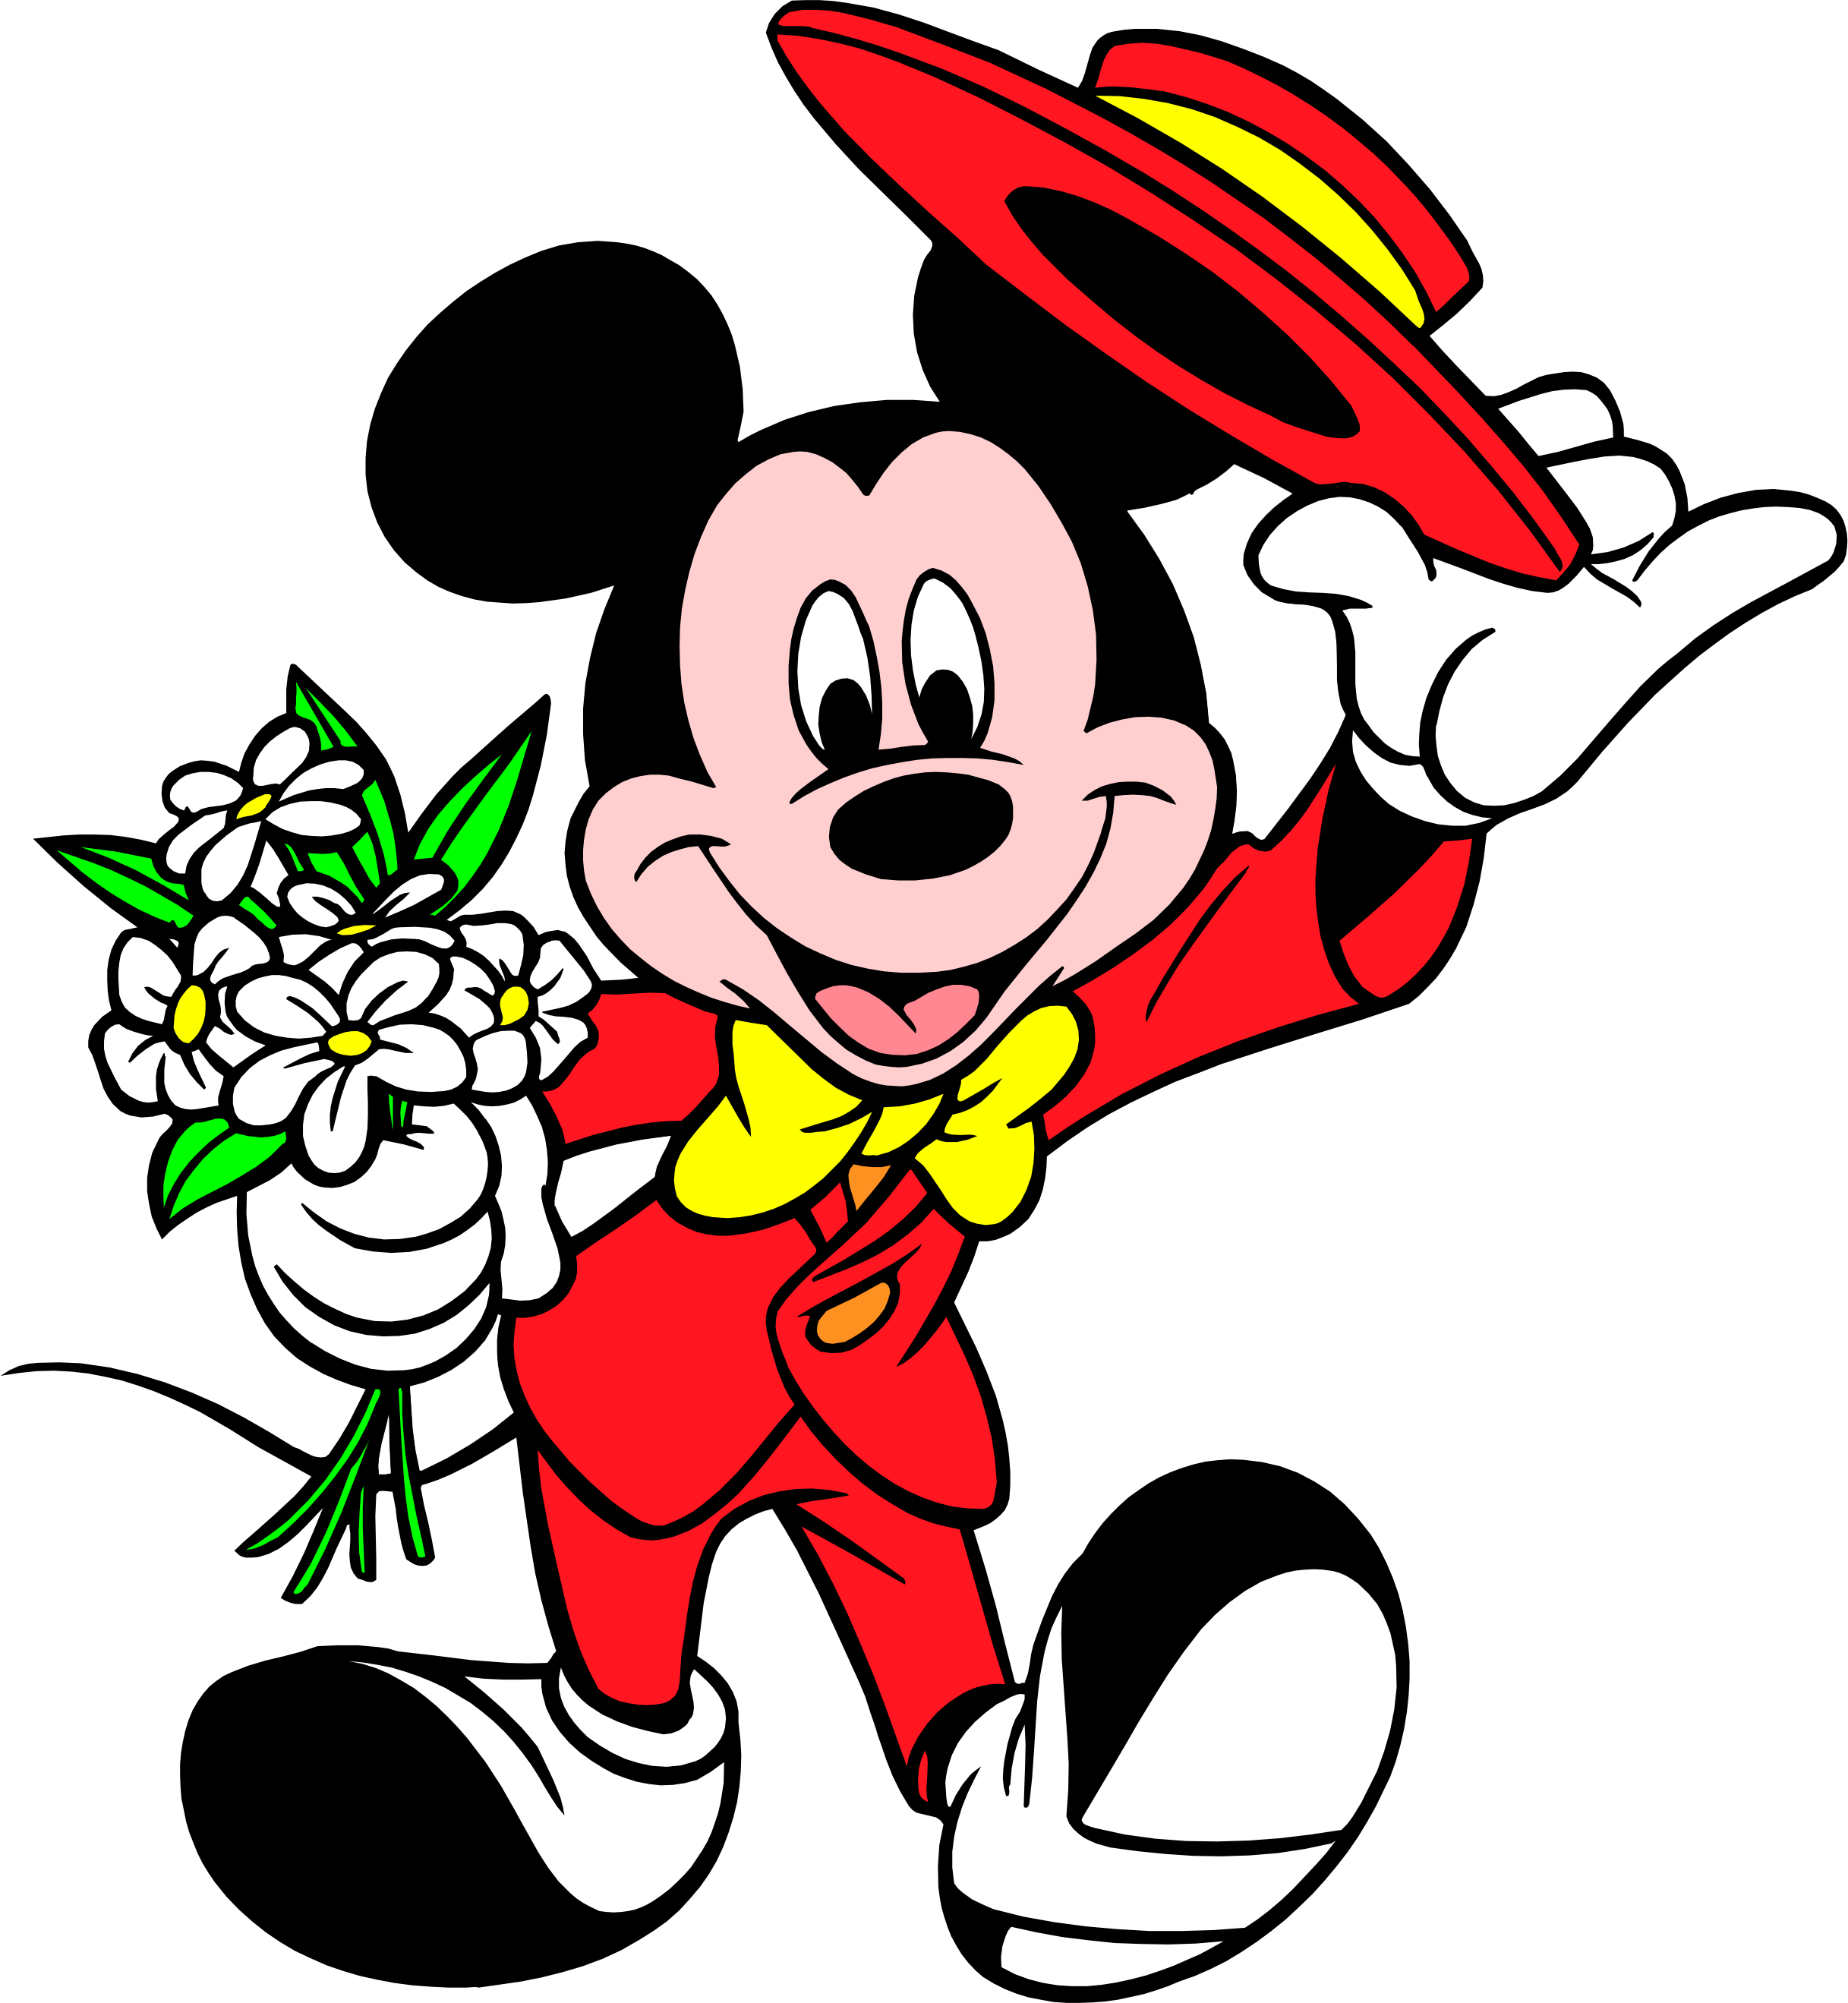 Clipart people dizzy. Mickey mouse by convitex